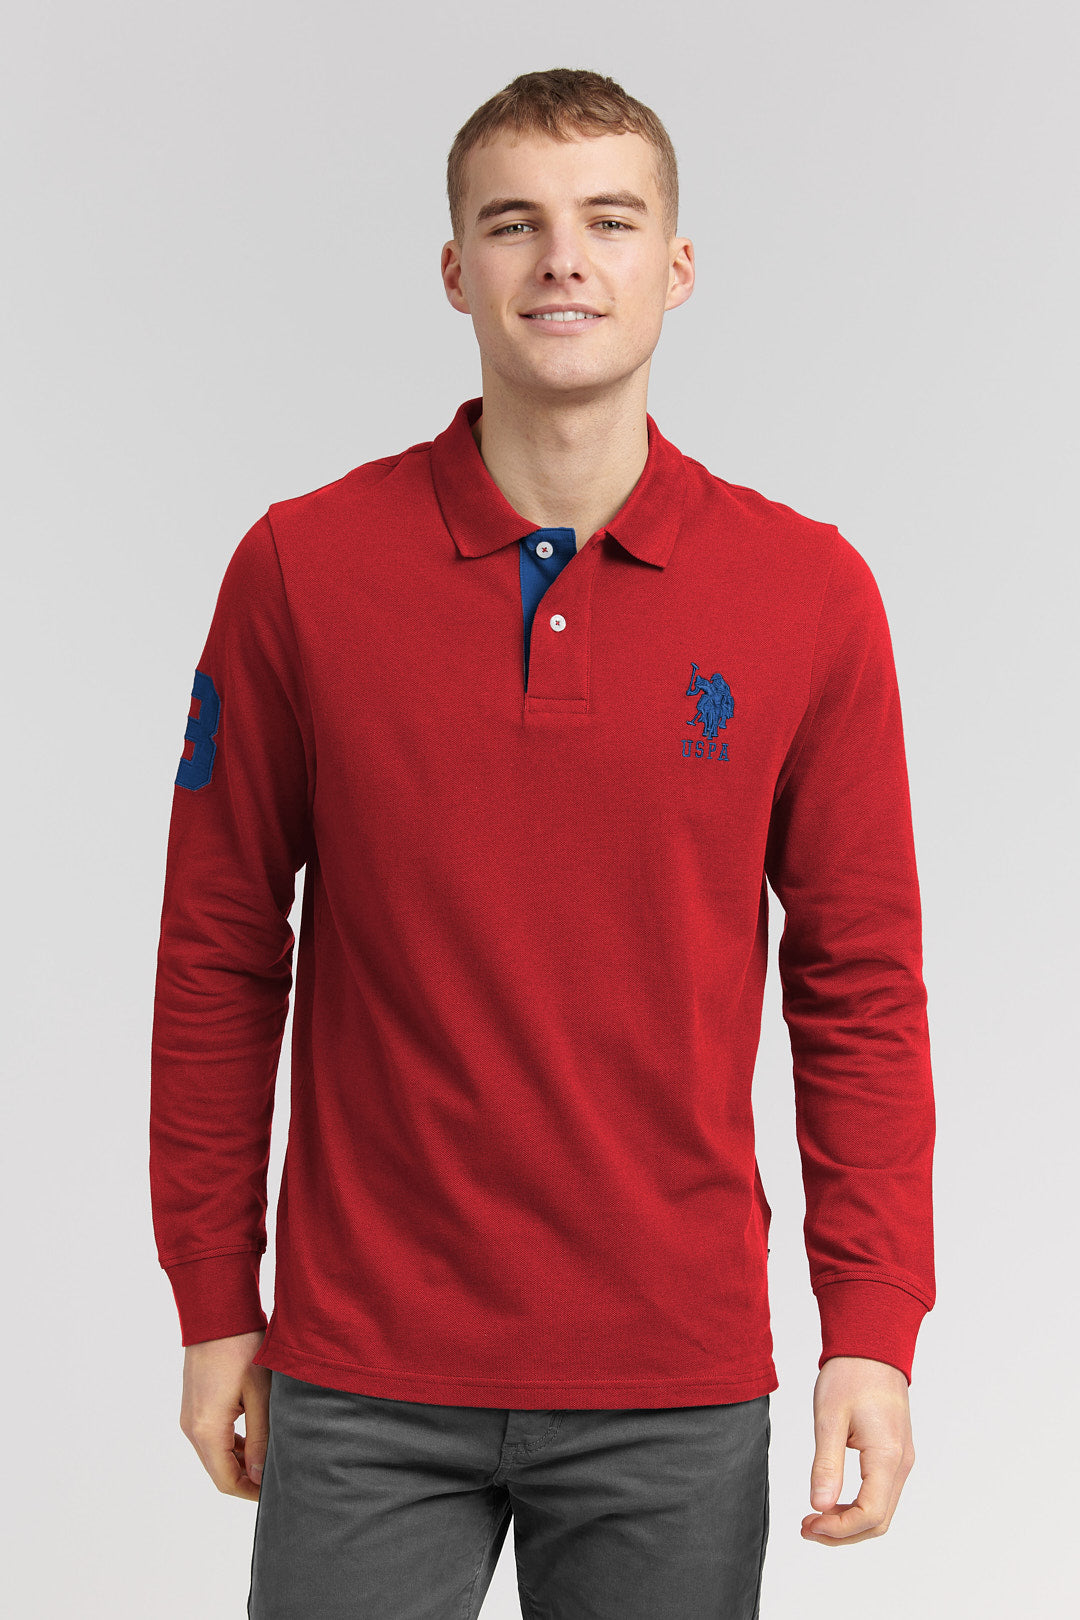 Men's Long Sleeve Polo, Men's Rugby Shirts